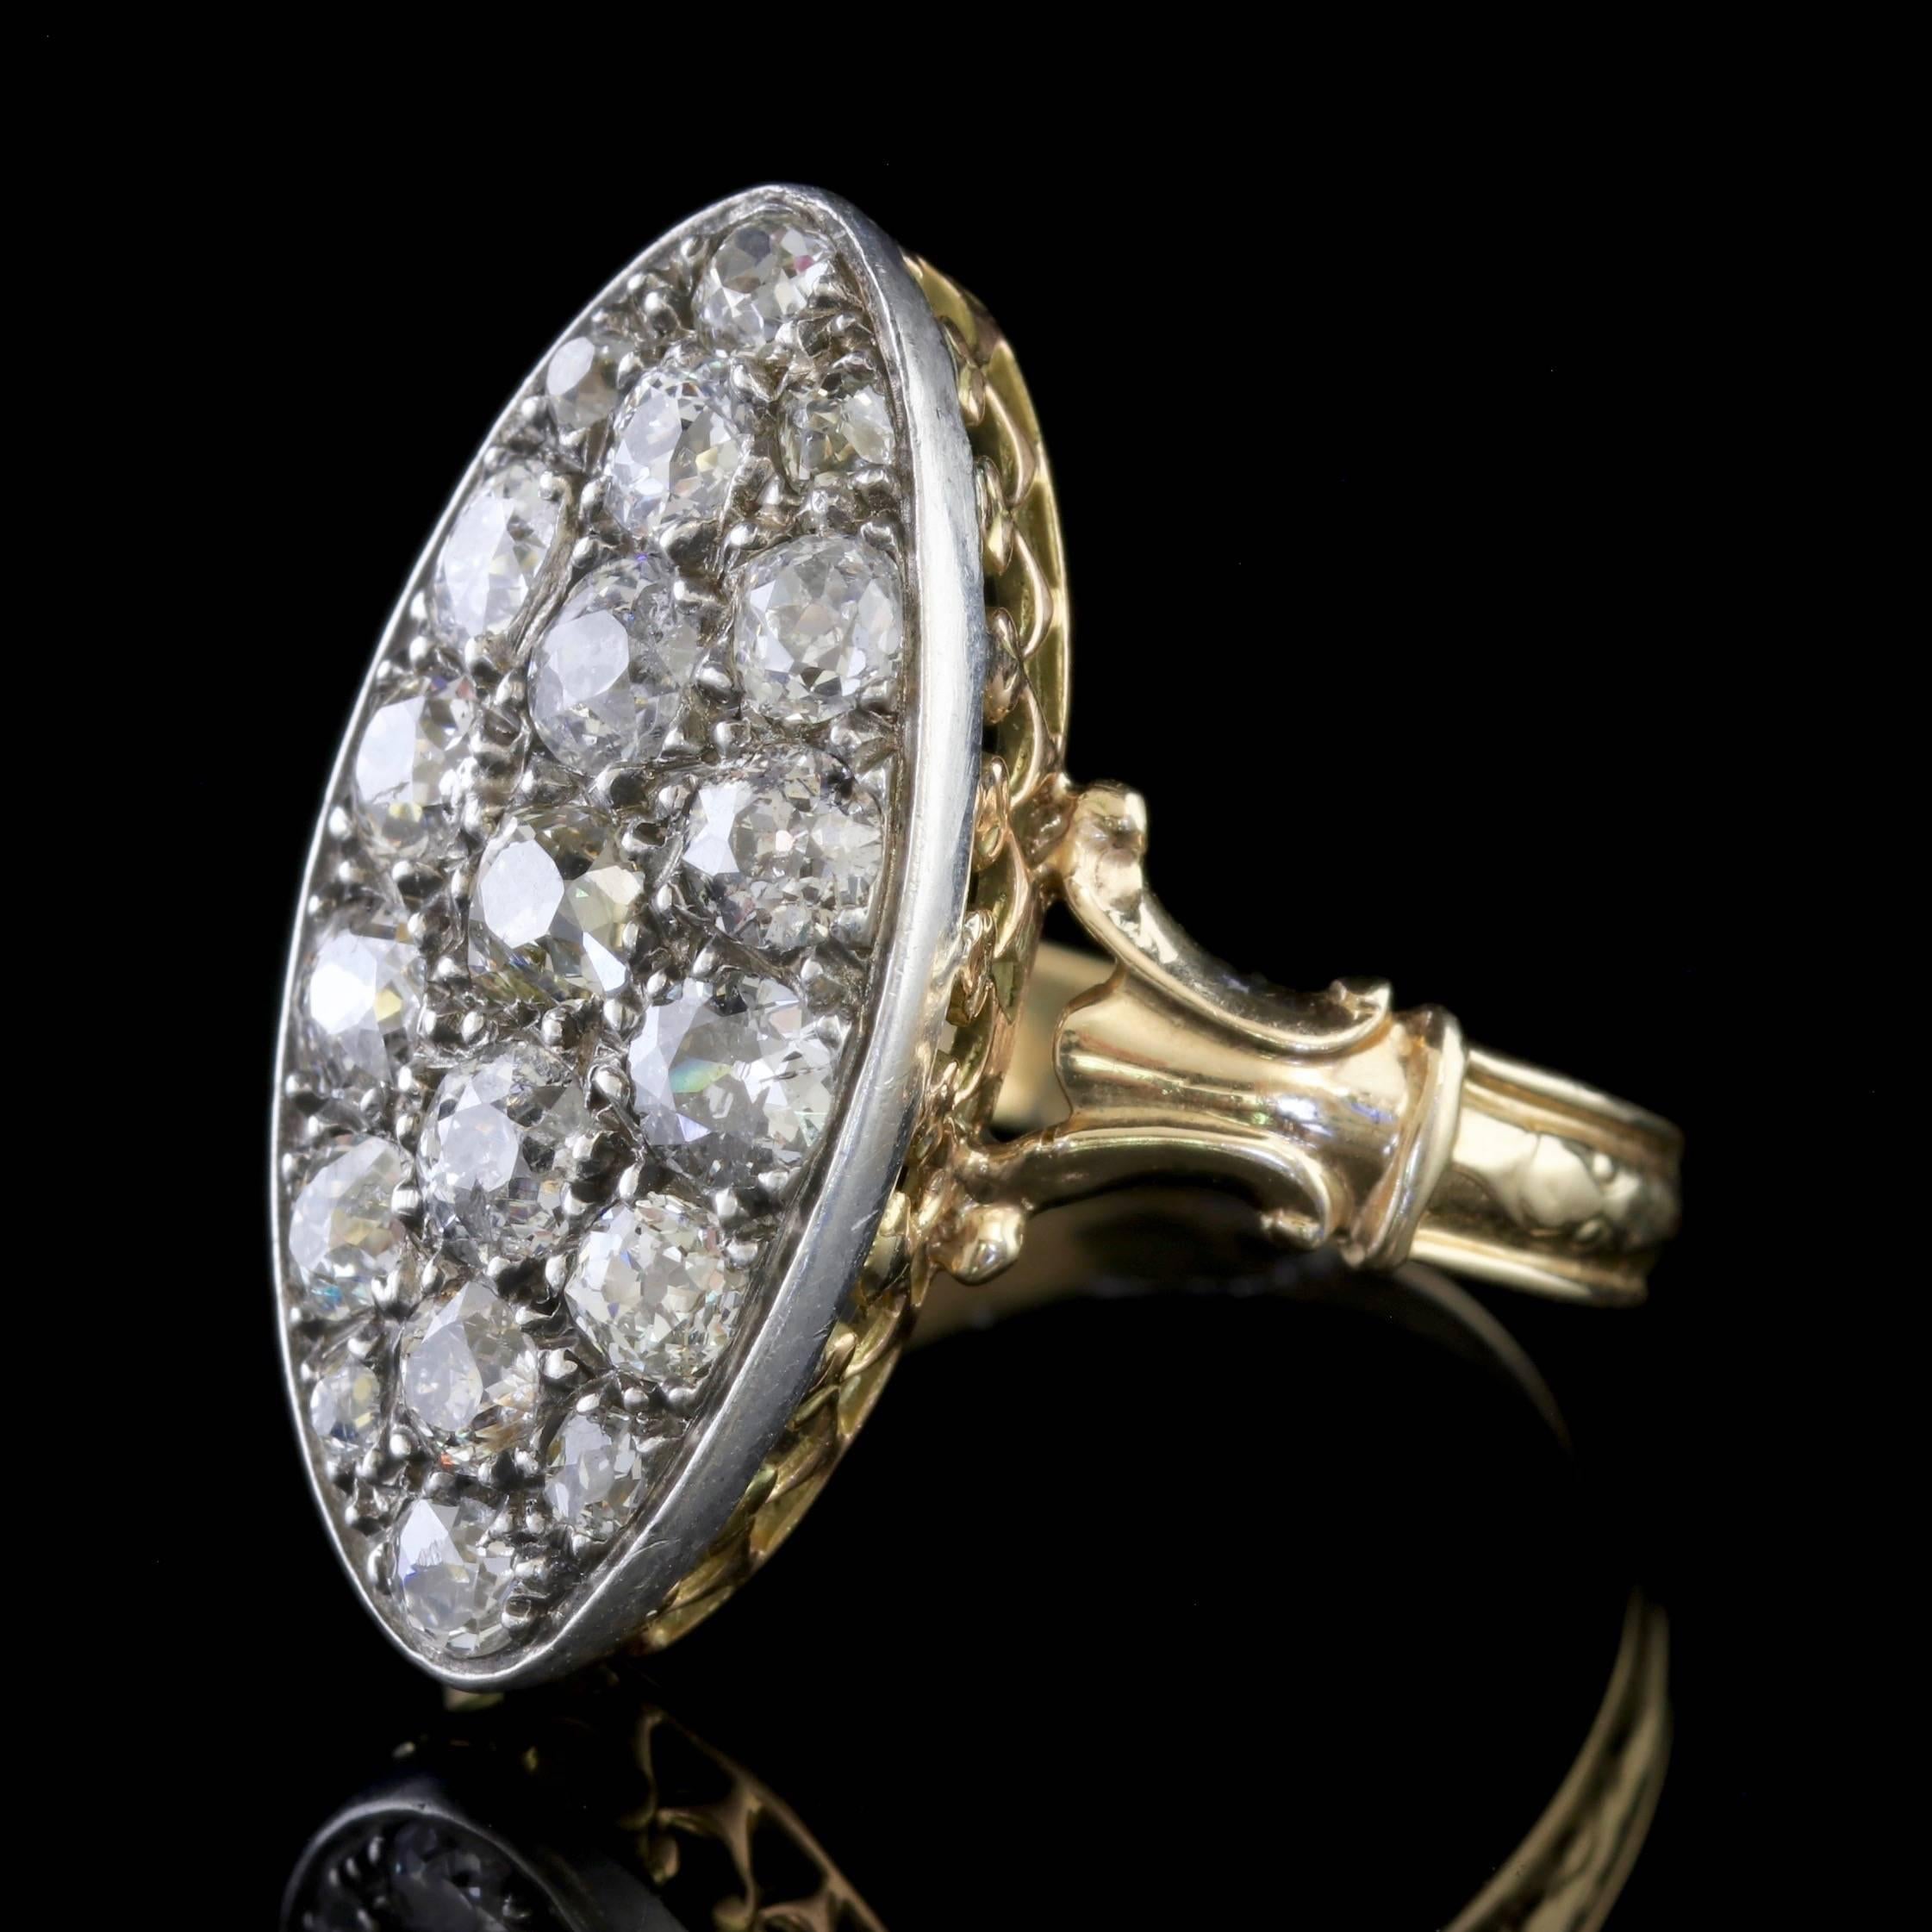 This magnificent antique marquise Diamond ring is Victorian Circa 1880. 

The ring is set with over 3ct of glistening old cushion cut Diamonds in a marquise shape. 

Diamond is the hardest mineral on Earth and this combined with its exceptional